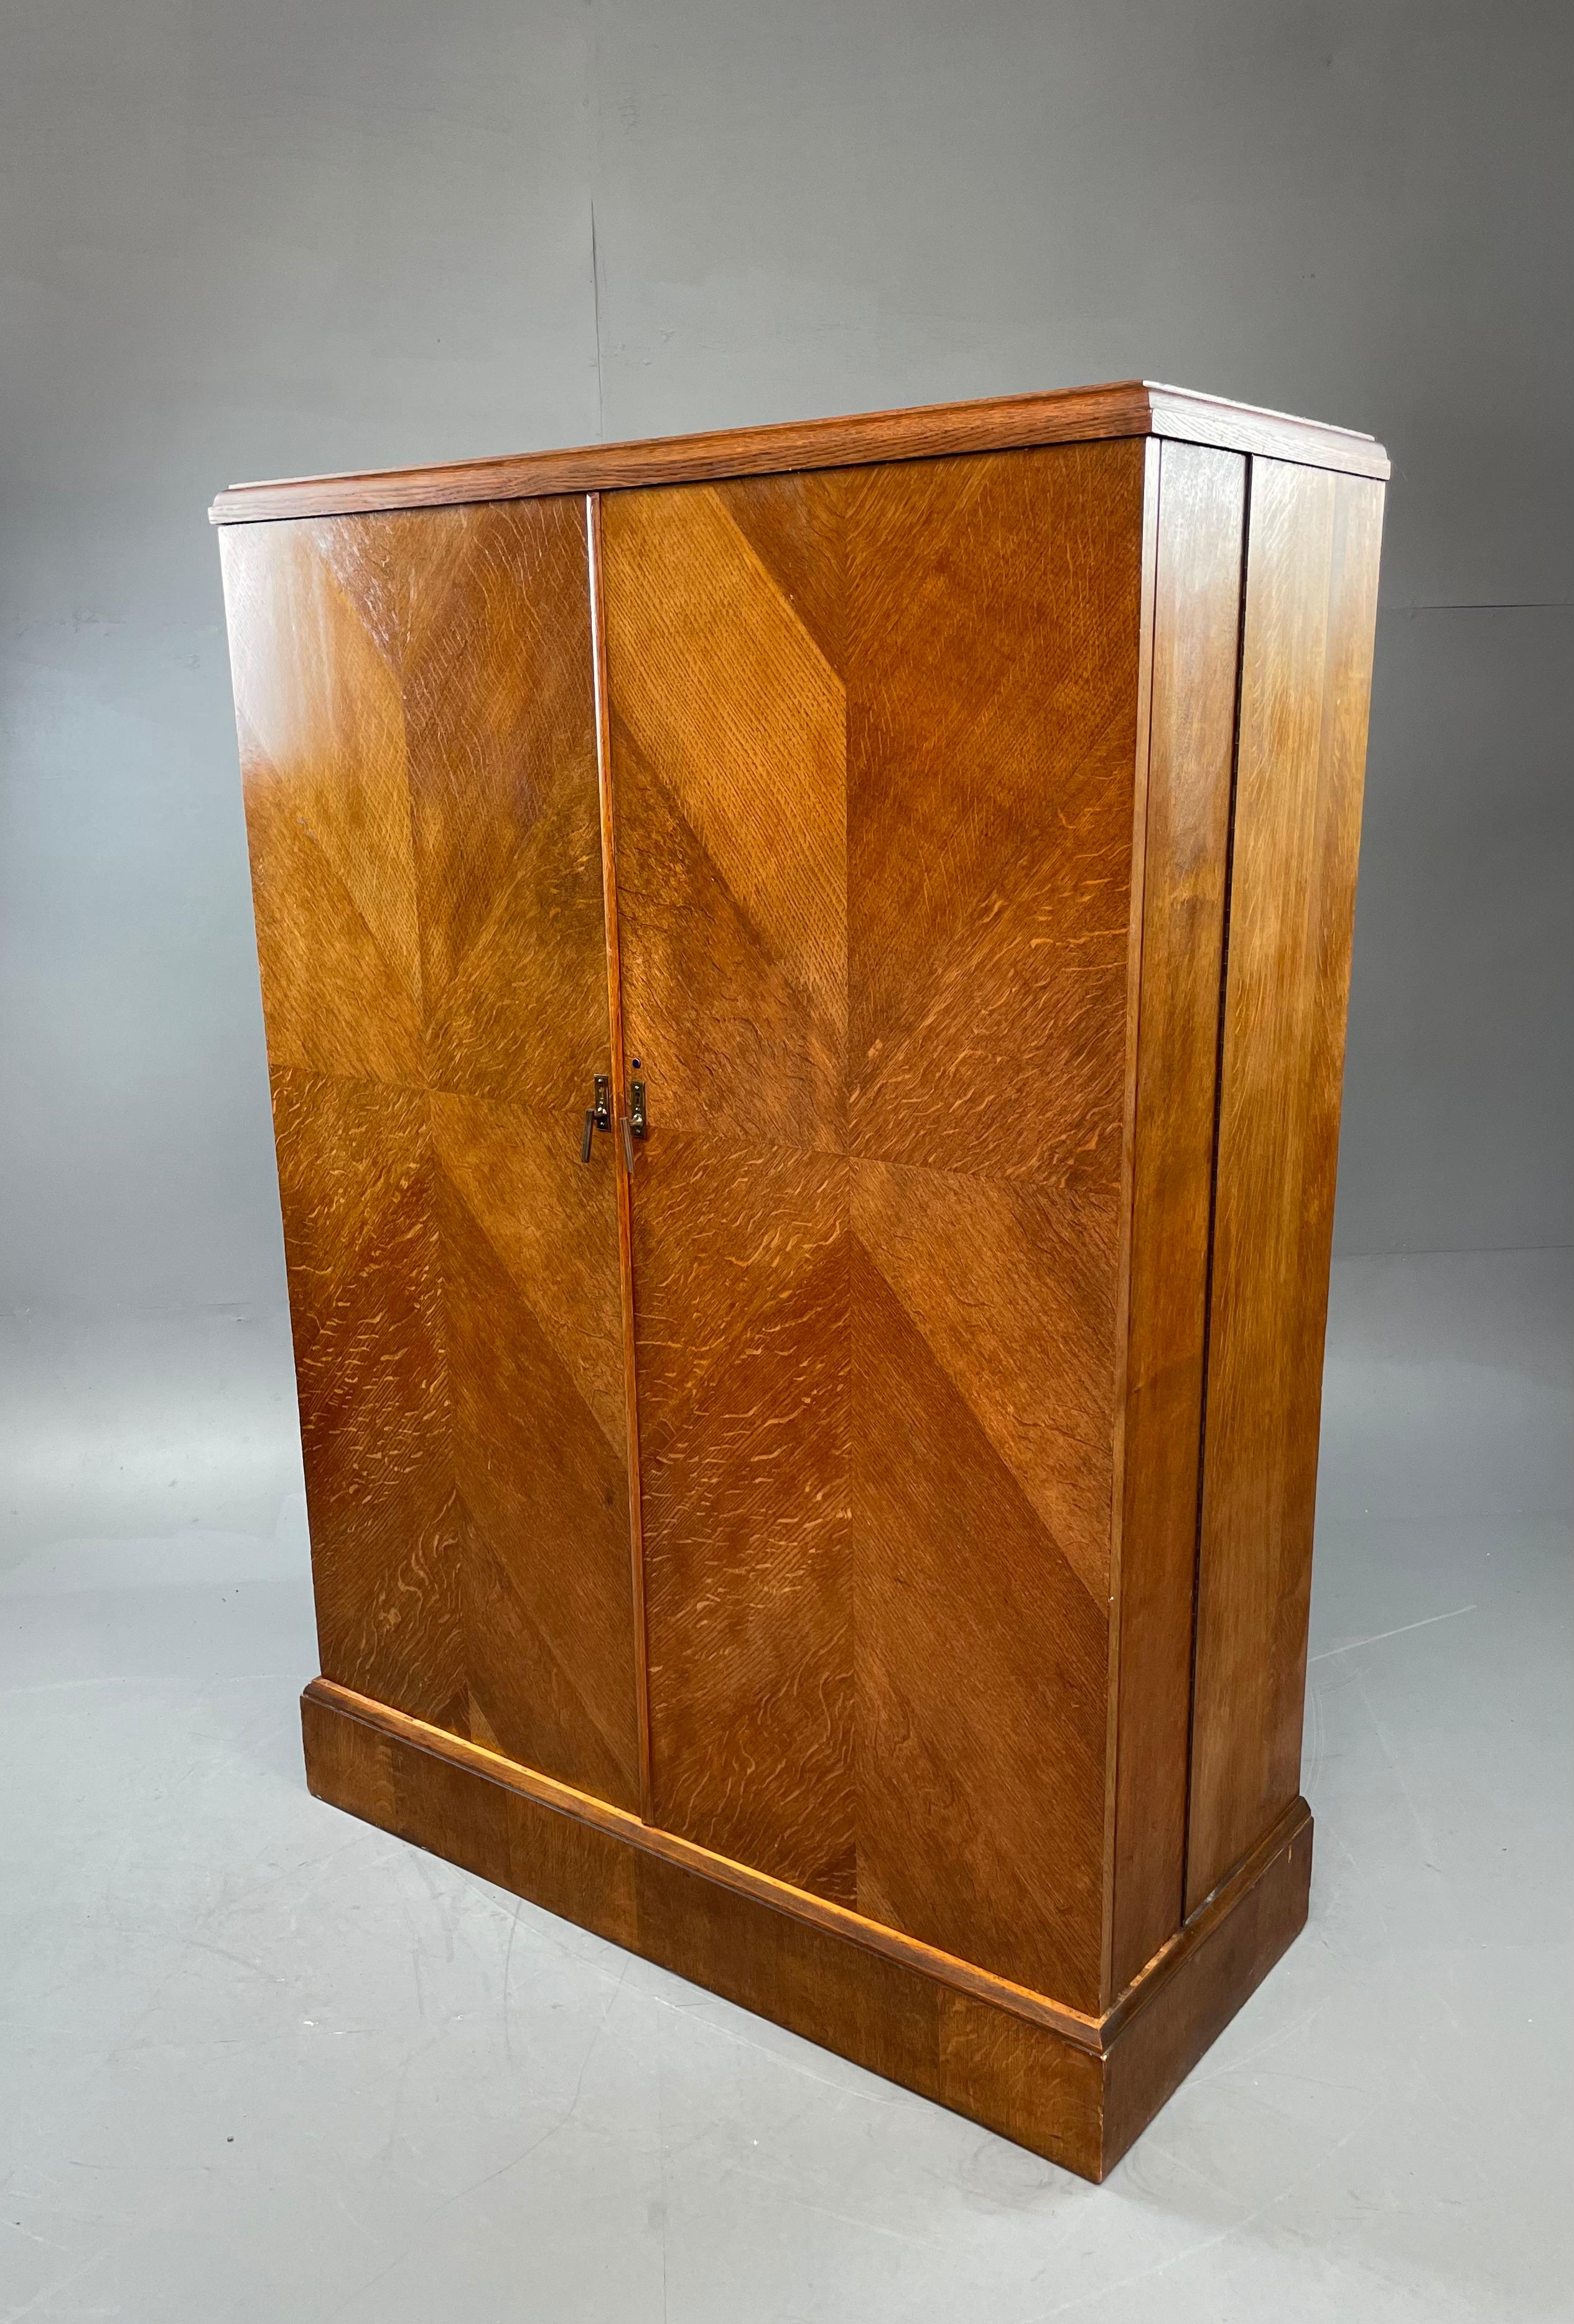 Original oak compactom deep door gentleman’s fitted wardrobe 
This iconic British made and designed wardrobe is in fantastic original condition 
The interior is fully fitted and retains all original labels and fittings 
The right hand door opens